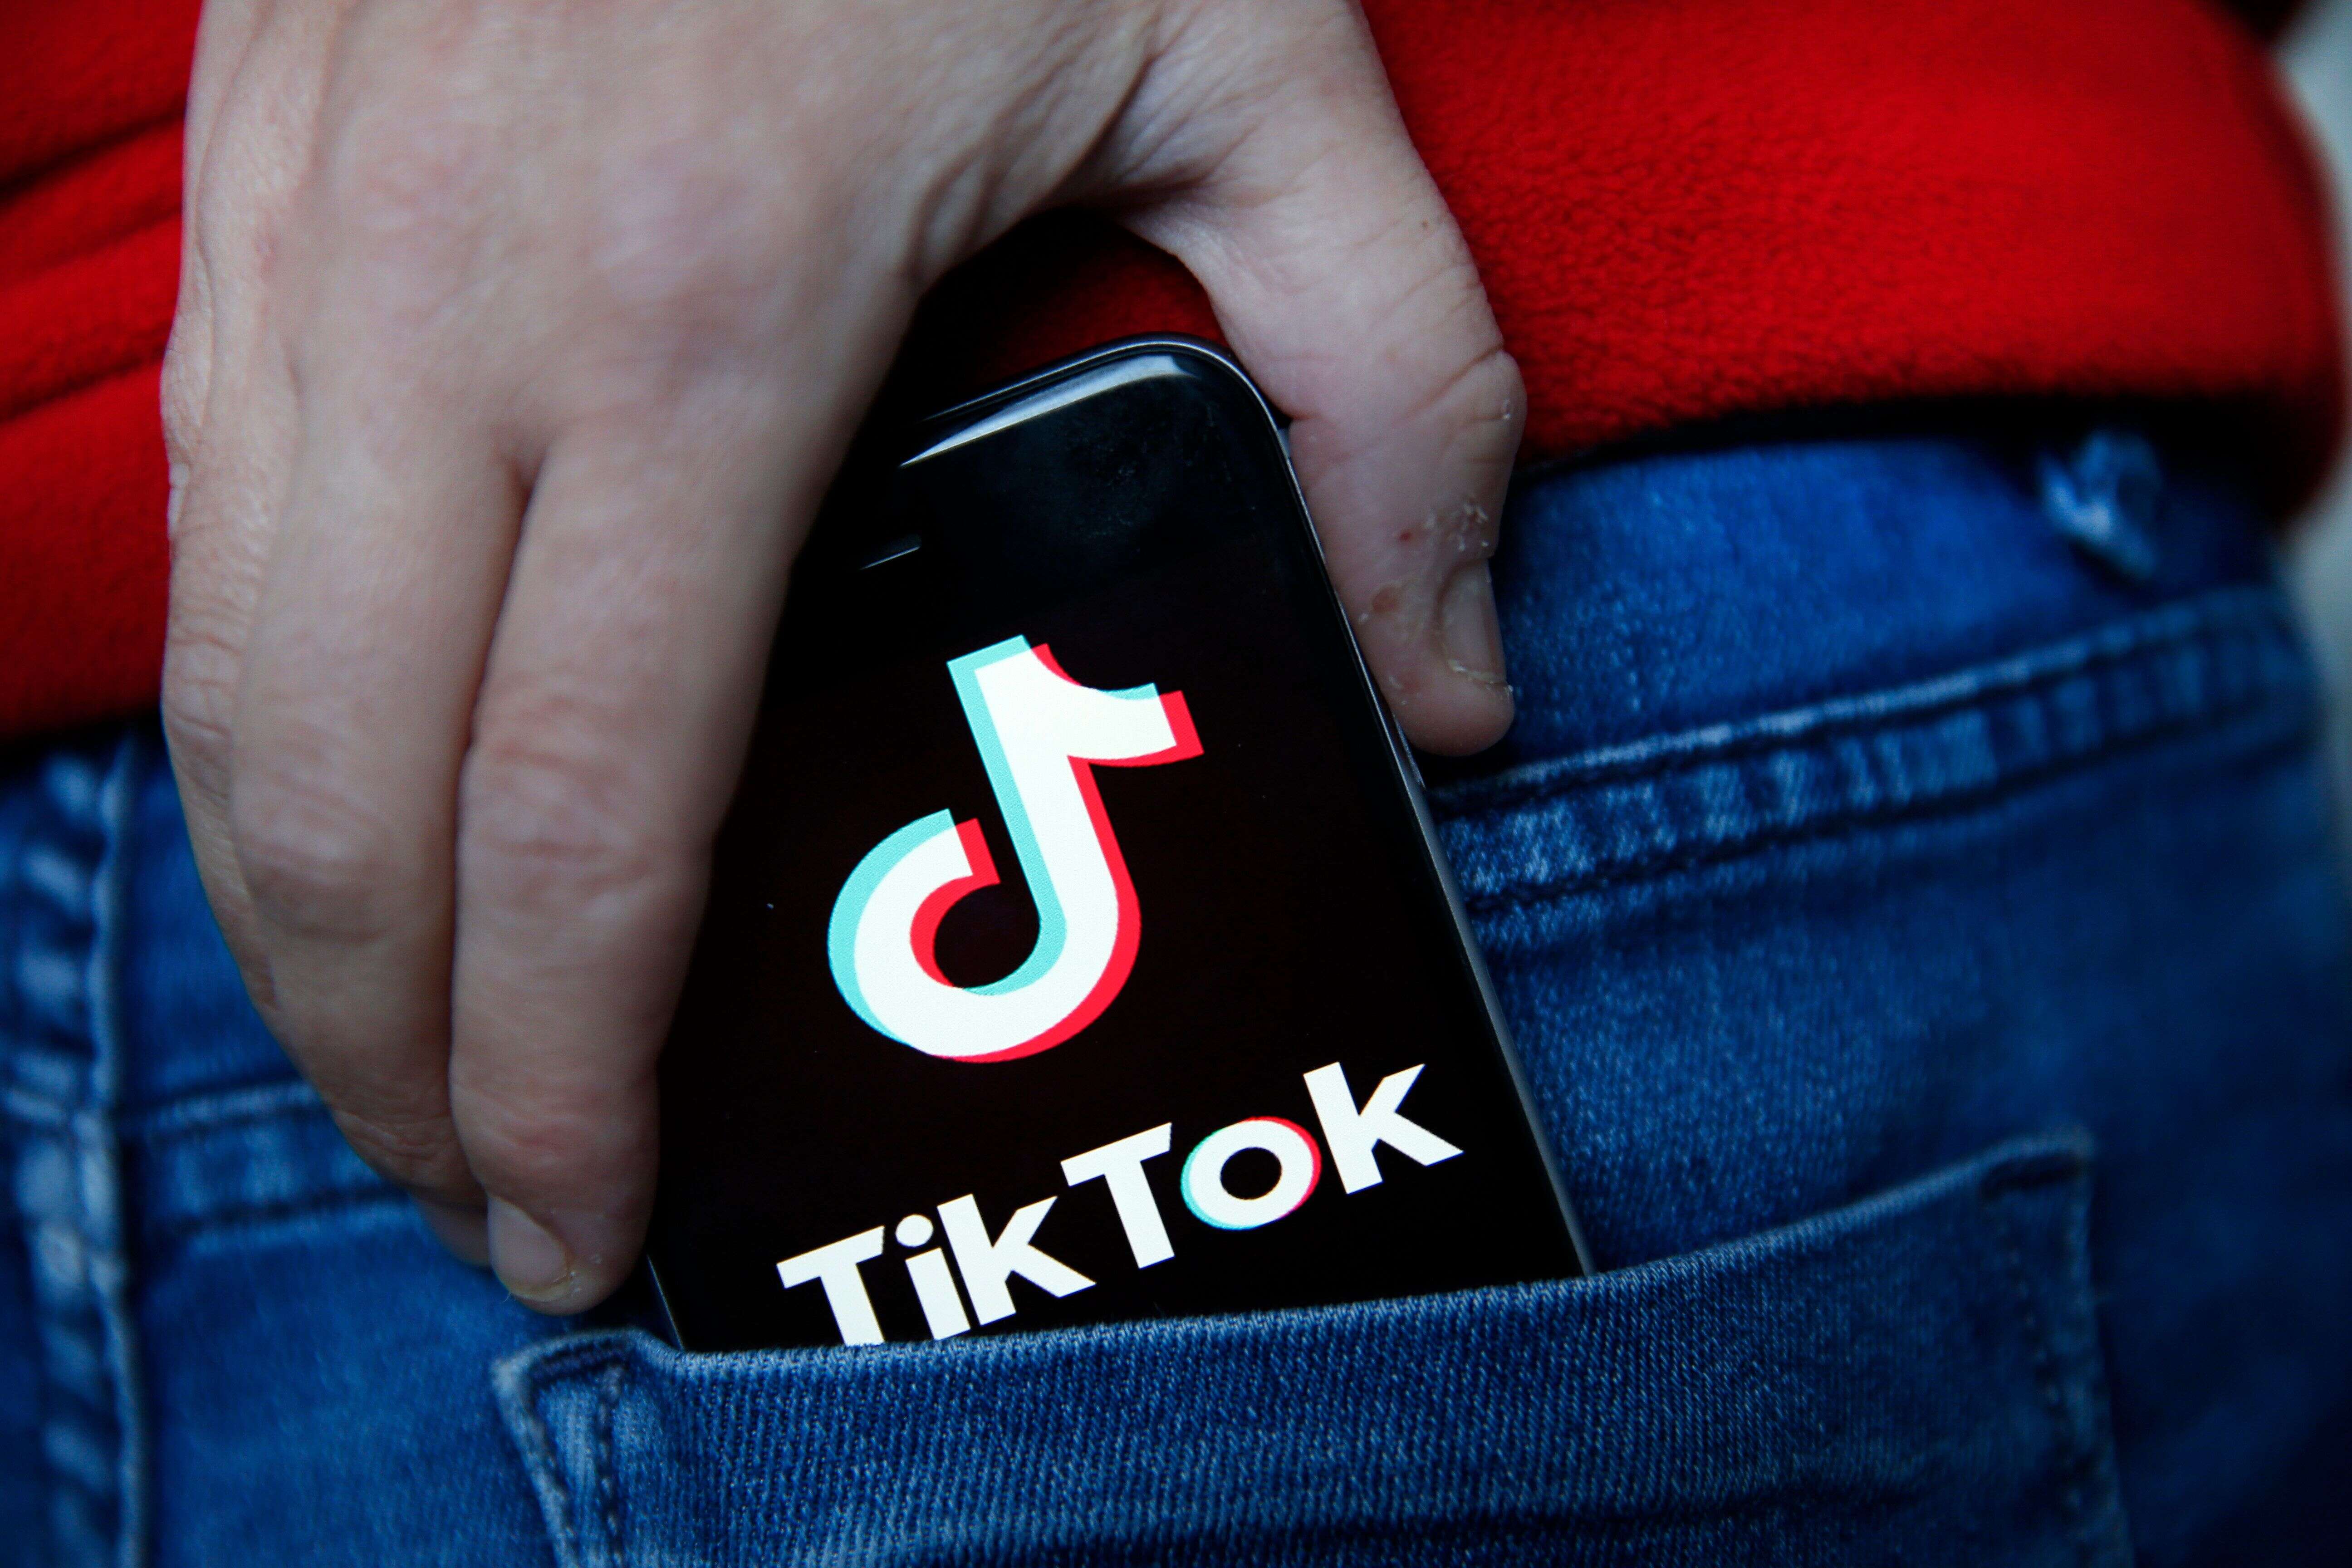 PARIS, FRANCE - NOVEMBER 20: In this photo illustration the logo of Chinese media app for creating and sharing short videos TikTok, also known as Douyin is displayed on the screen of a smartphone on November 20, 2019 in Paris, France. The social media TikTok developed by Chinese company ByteDance continues its meteoric rise and exceeded the milestone of 1.5 billion downloads. Tik Tok now surpasses Facebook and Instagram. (Photo by Chesnot/Getty Images)